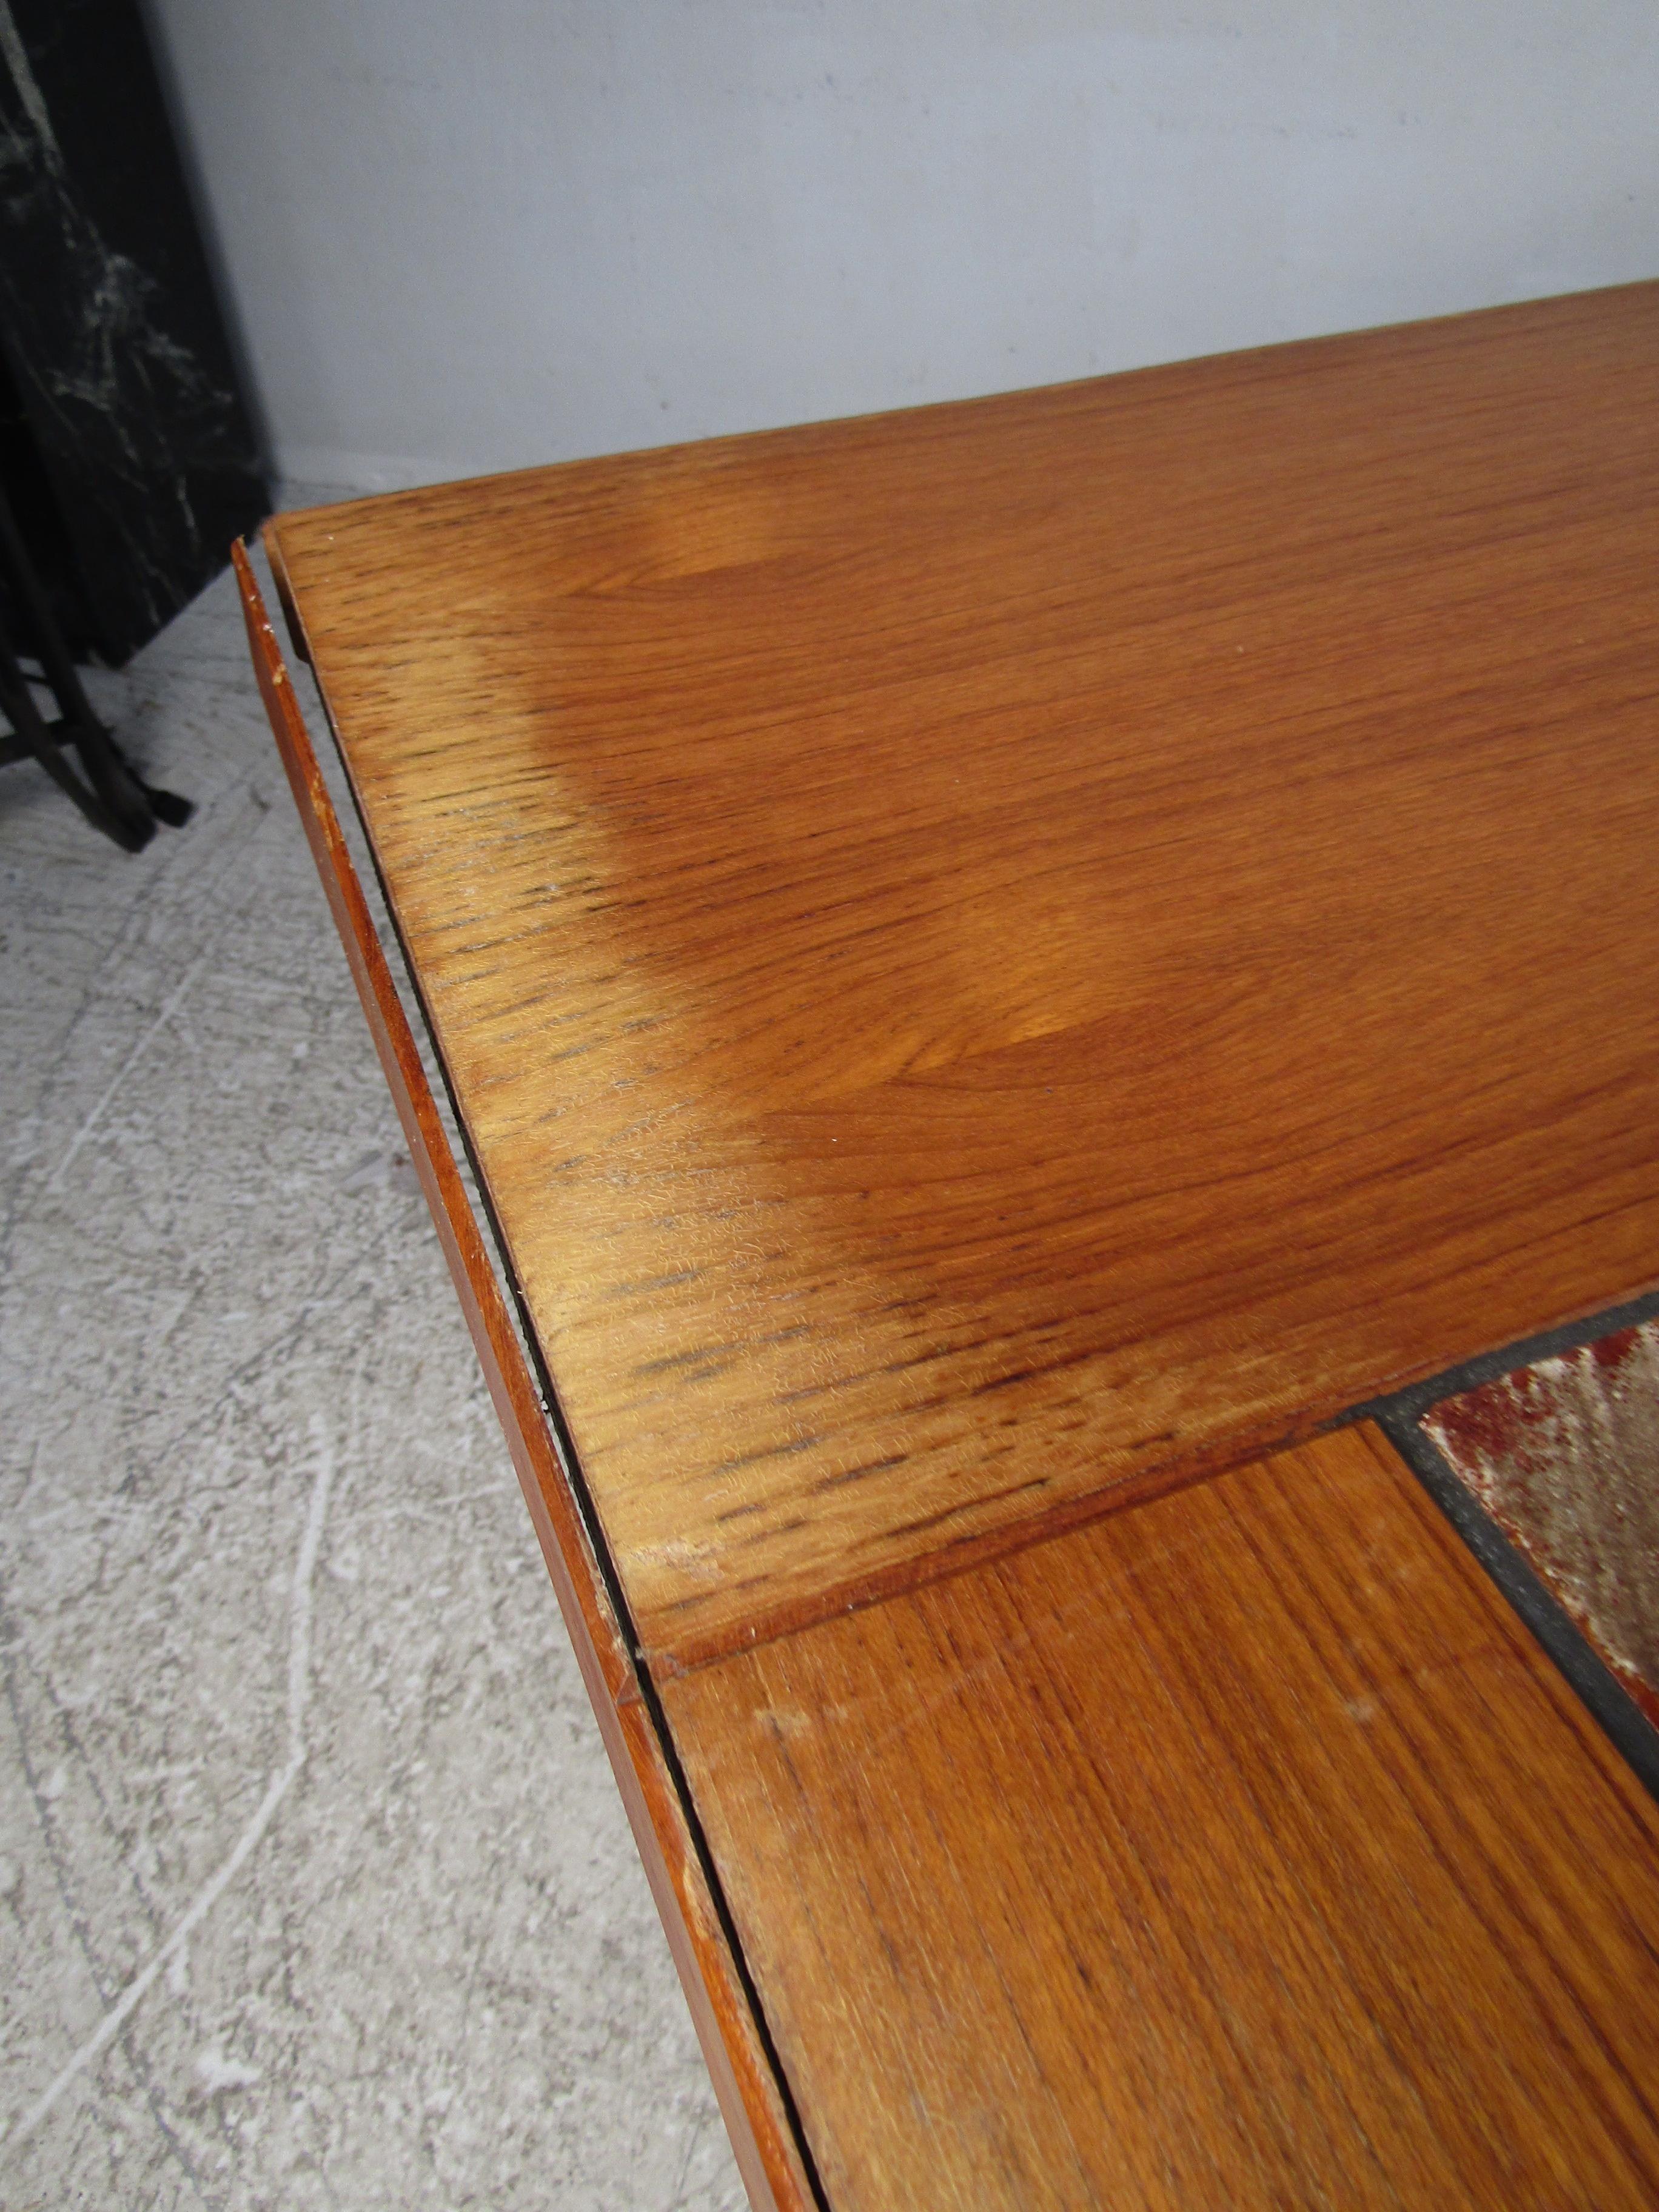 Danish Modern Drop-Leaf Dining Table with Tile Inlays For Sale 1